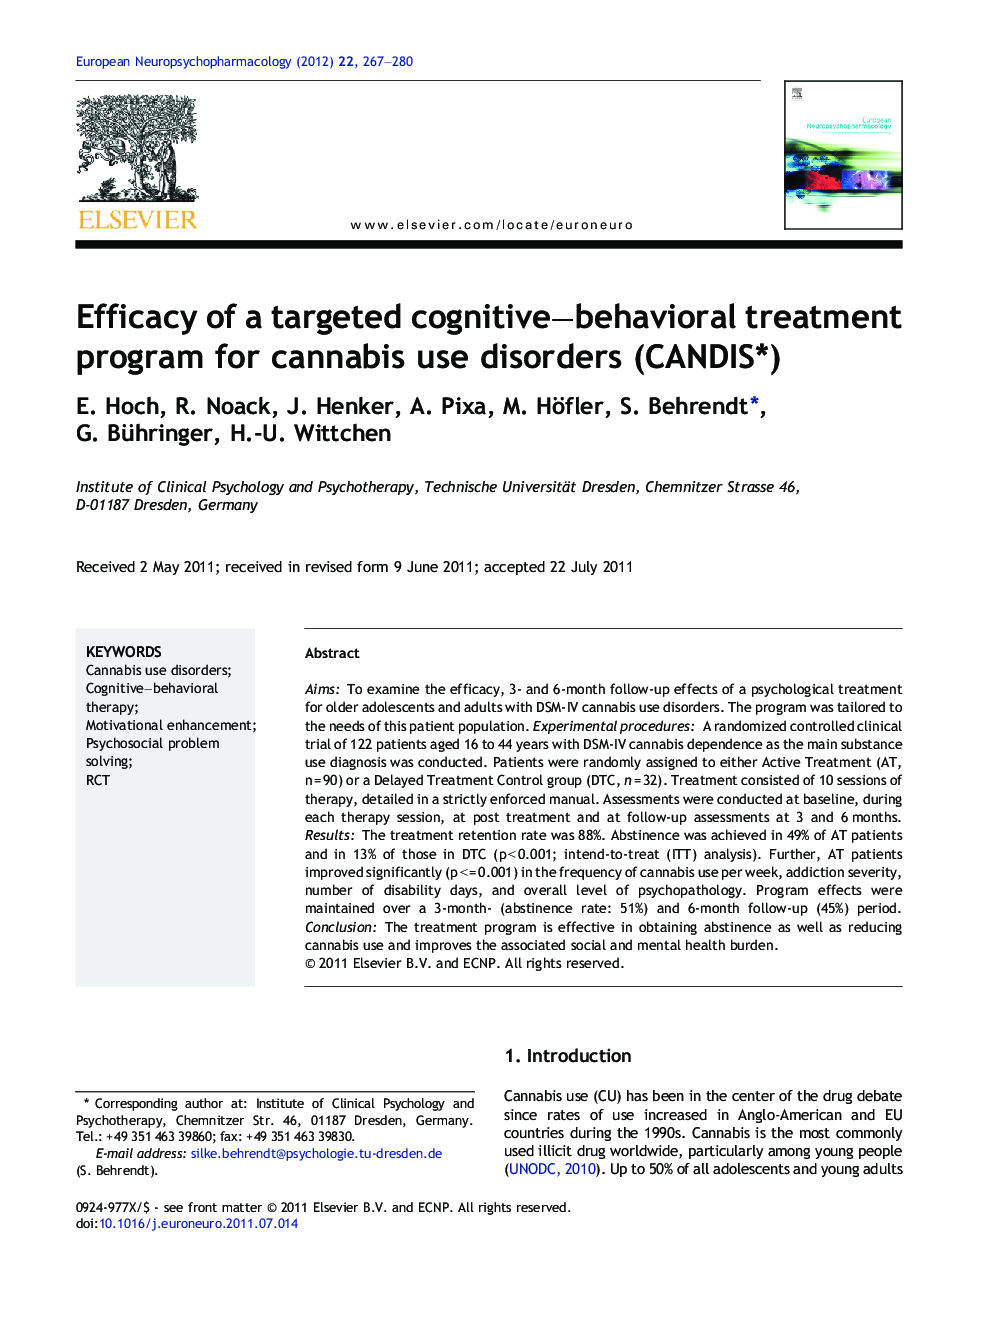 Efficacy of a targeted cognitive–behavioral treatment program for cannabis use disorders (CANDIS*)